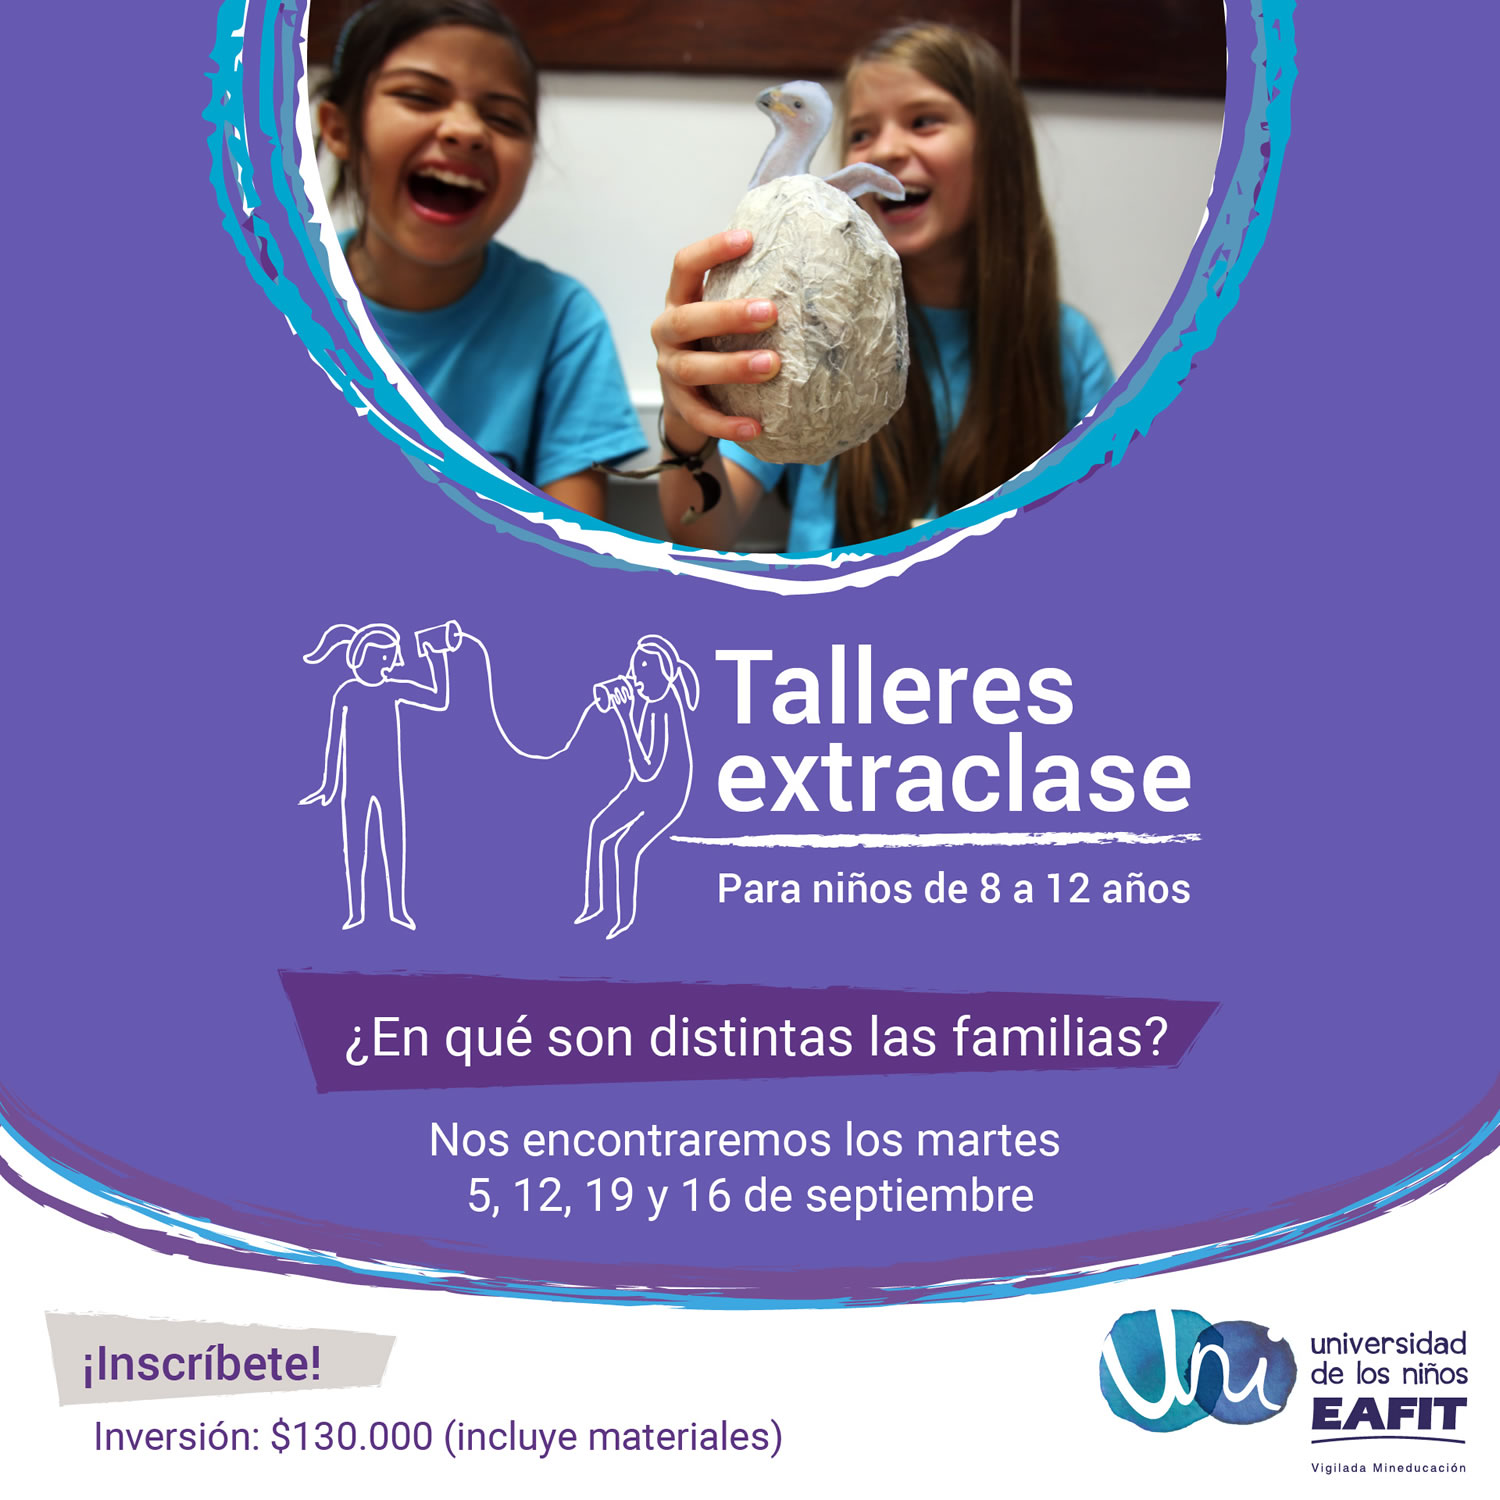 Post-redes-talleres-extraclases-familias1.jpg